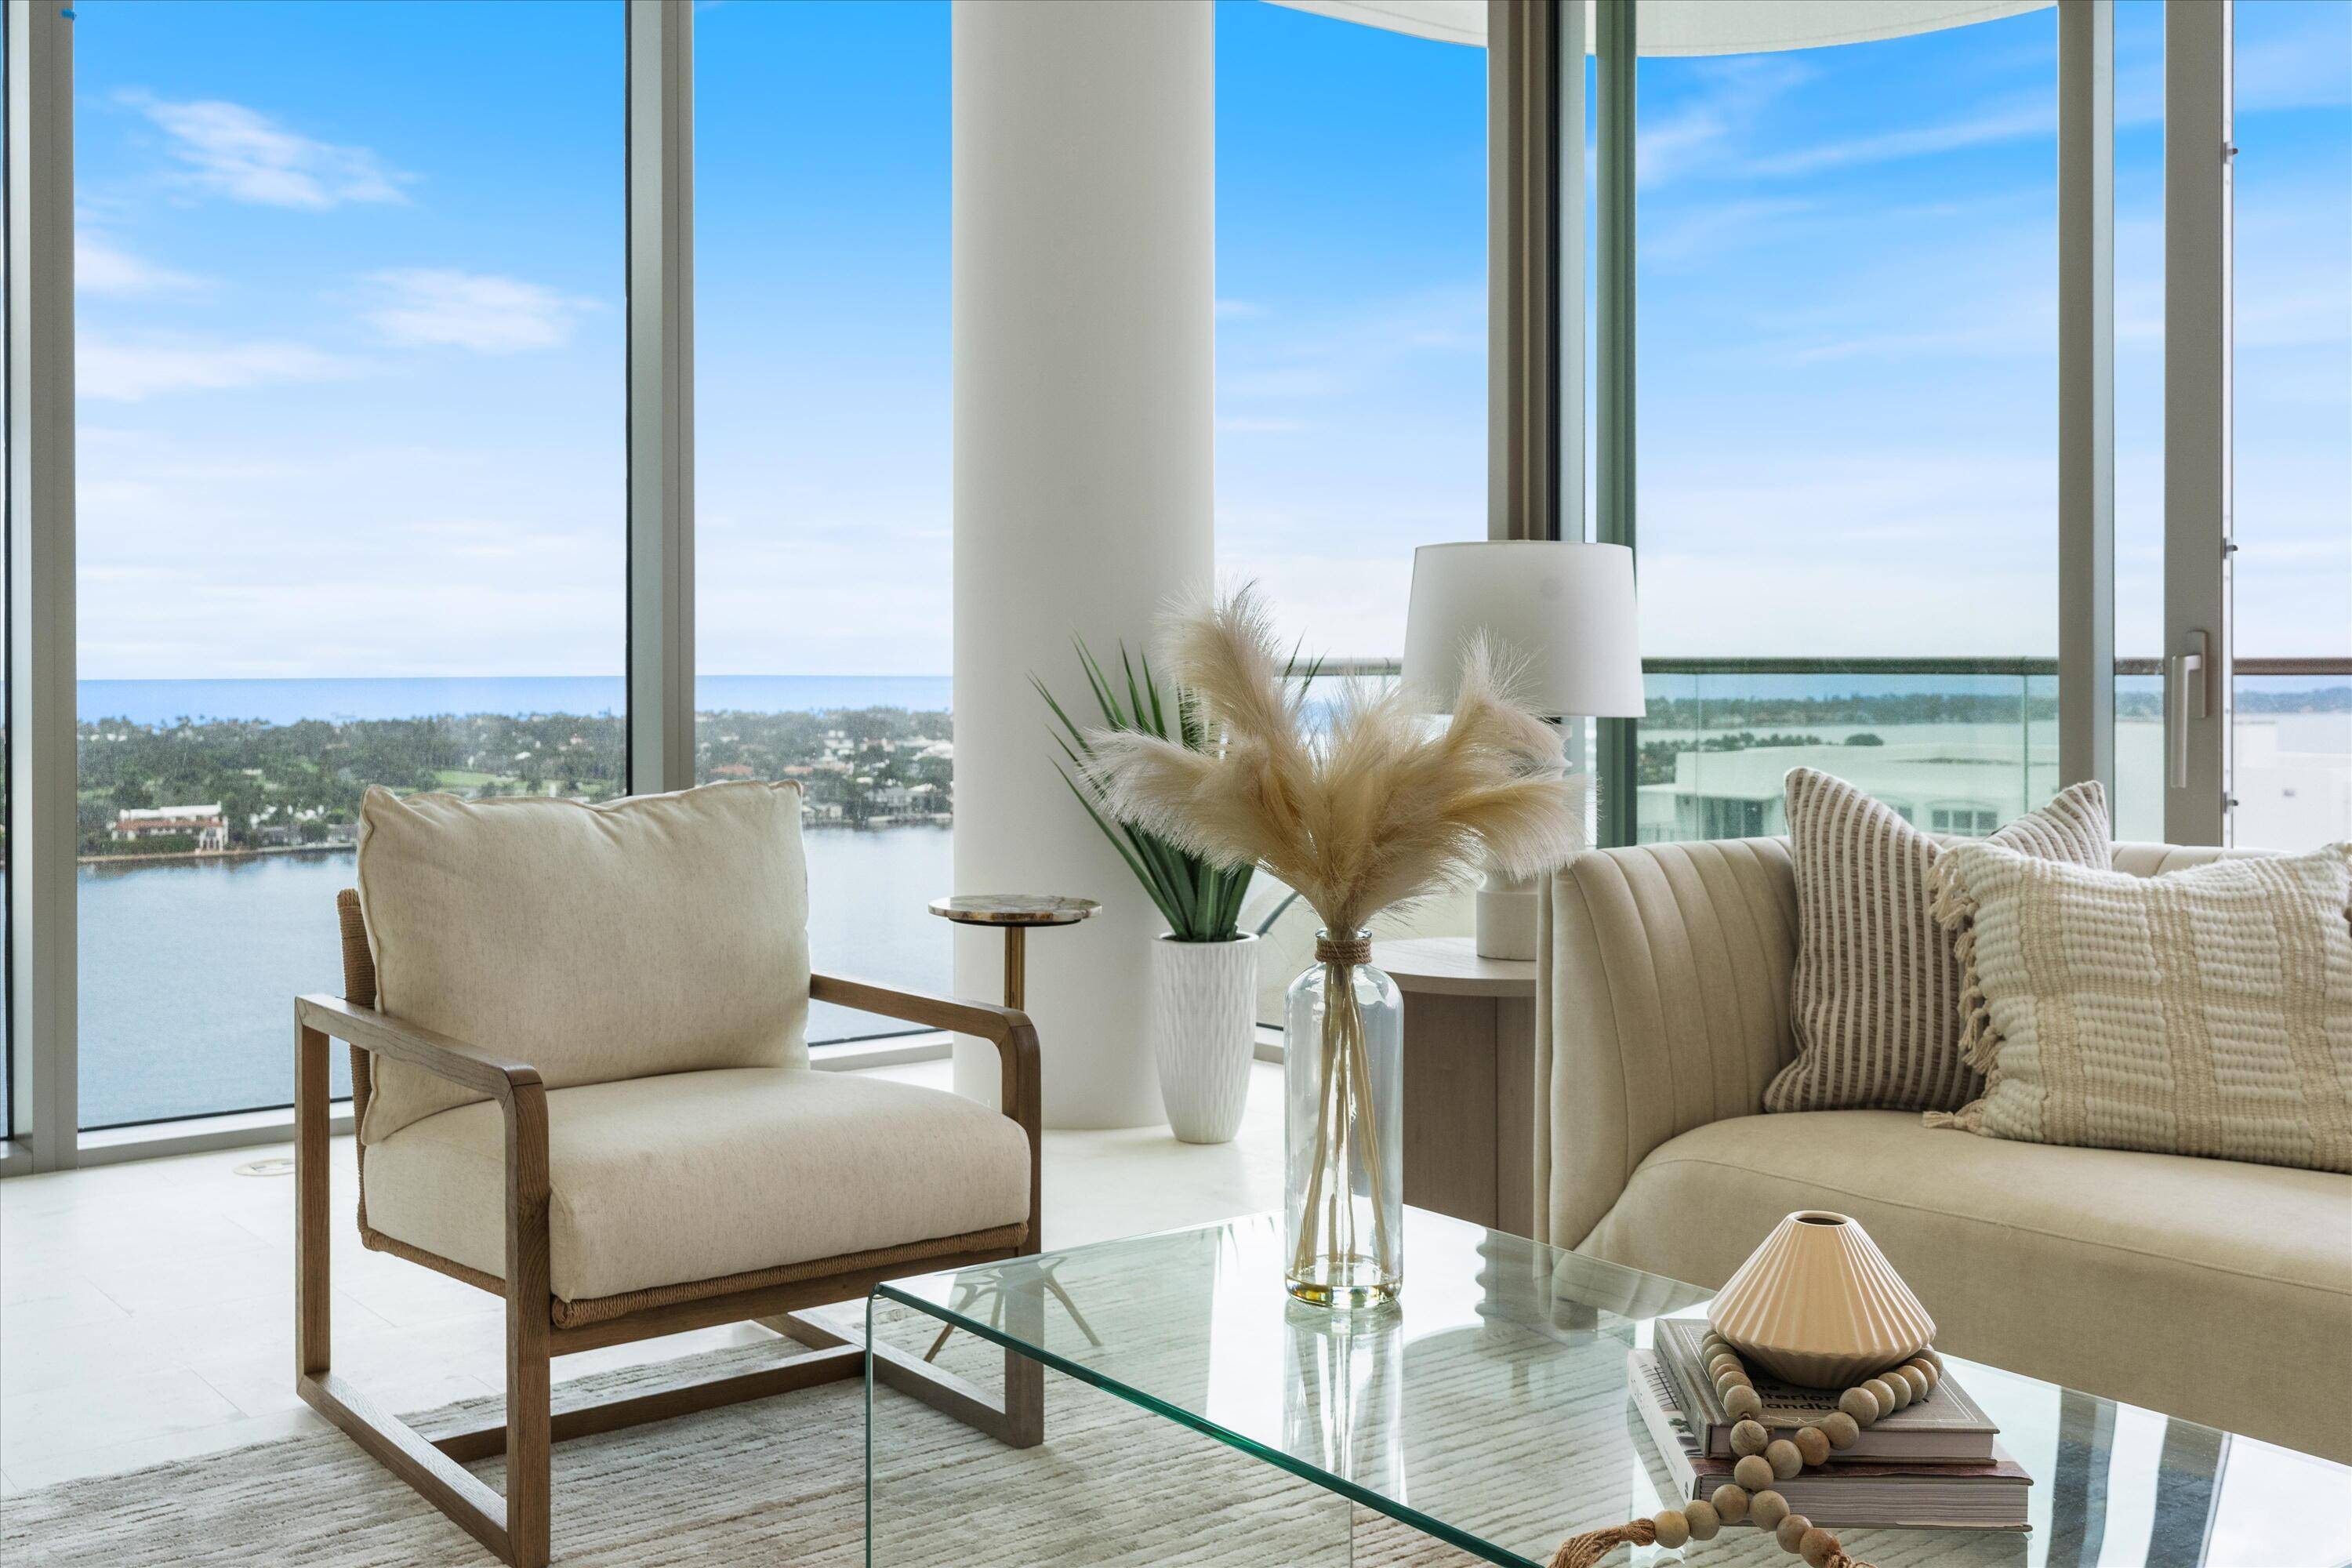 Indulge in the epitome of luxury at La Clara in this brand new 17th floor residence with breathtaking intracoastal to ocean views.